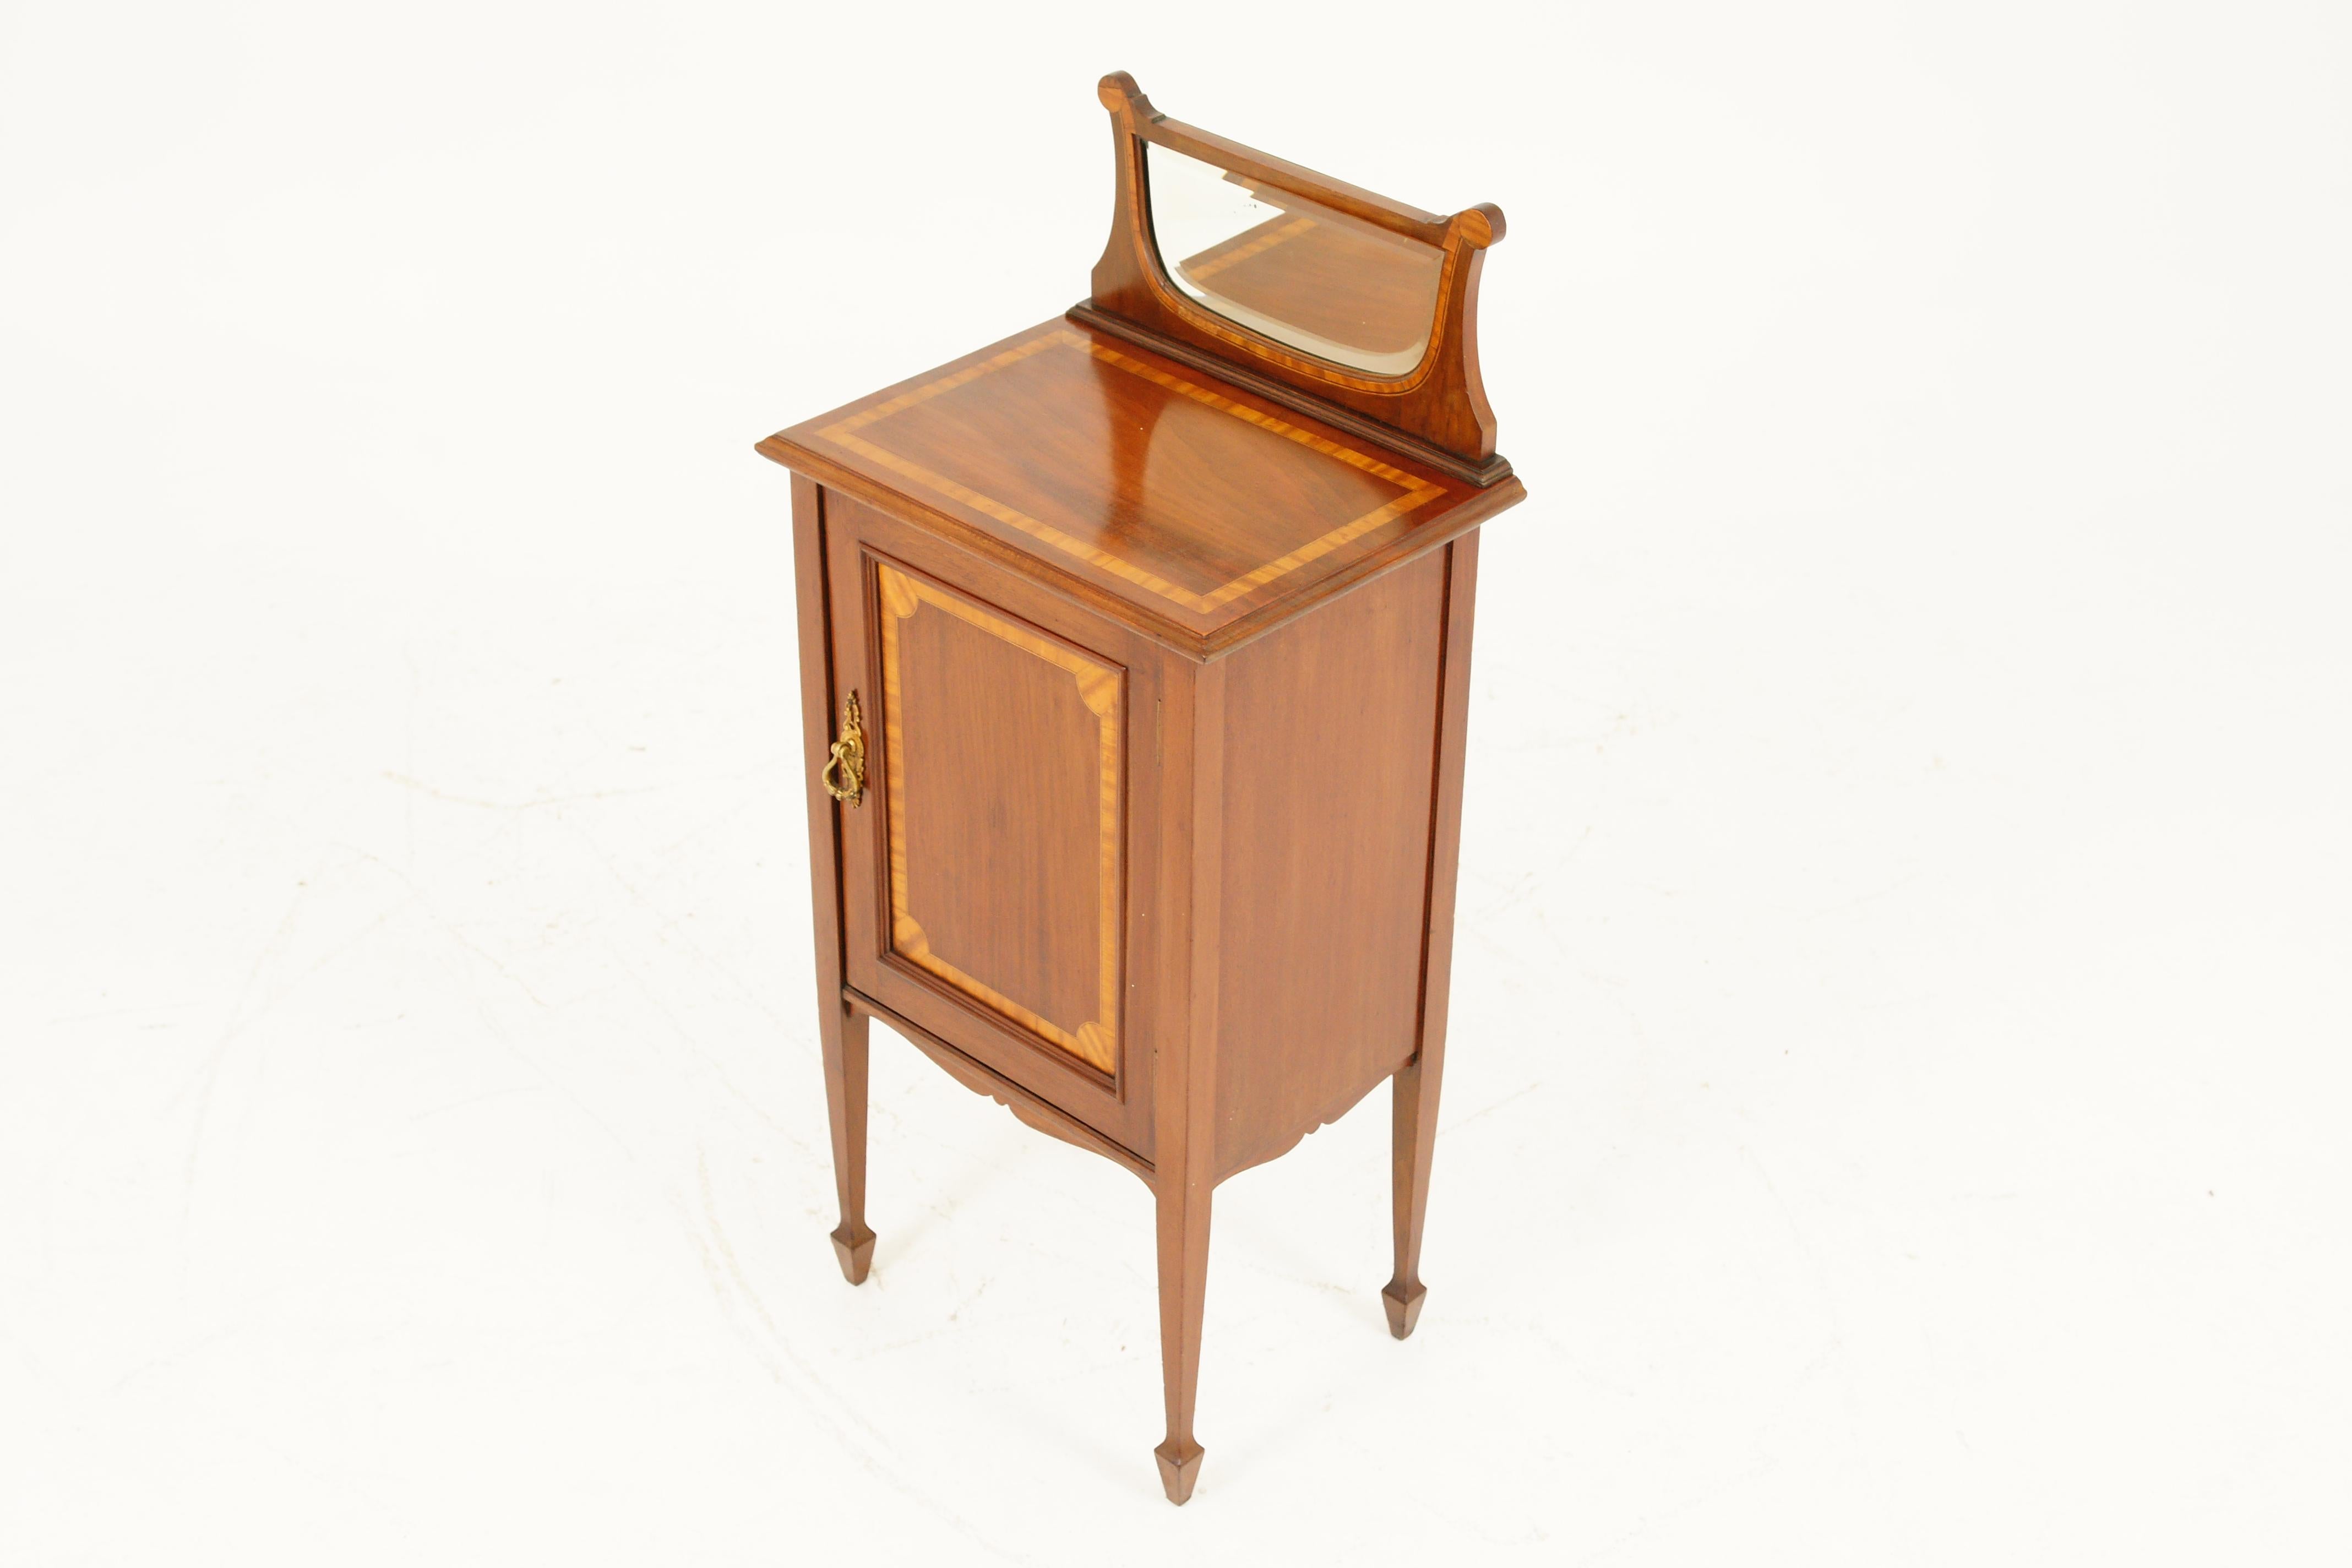 Walnut Antique Edwardian Mirror Back Inlaid Nightstand, Bedside, Lamp Table 1900, B1735